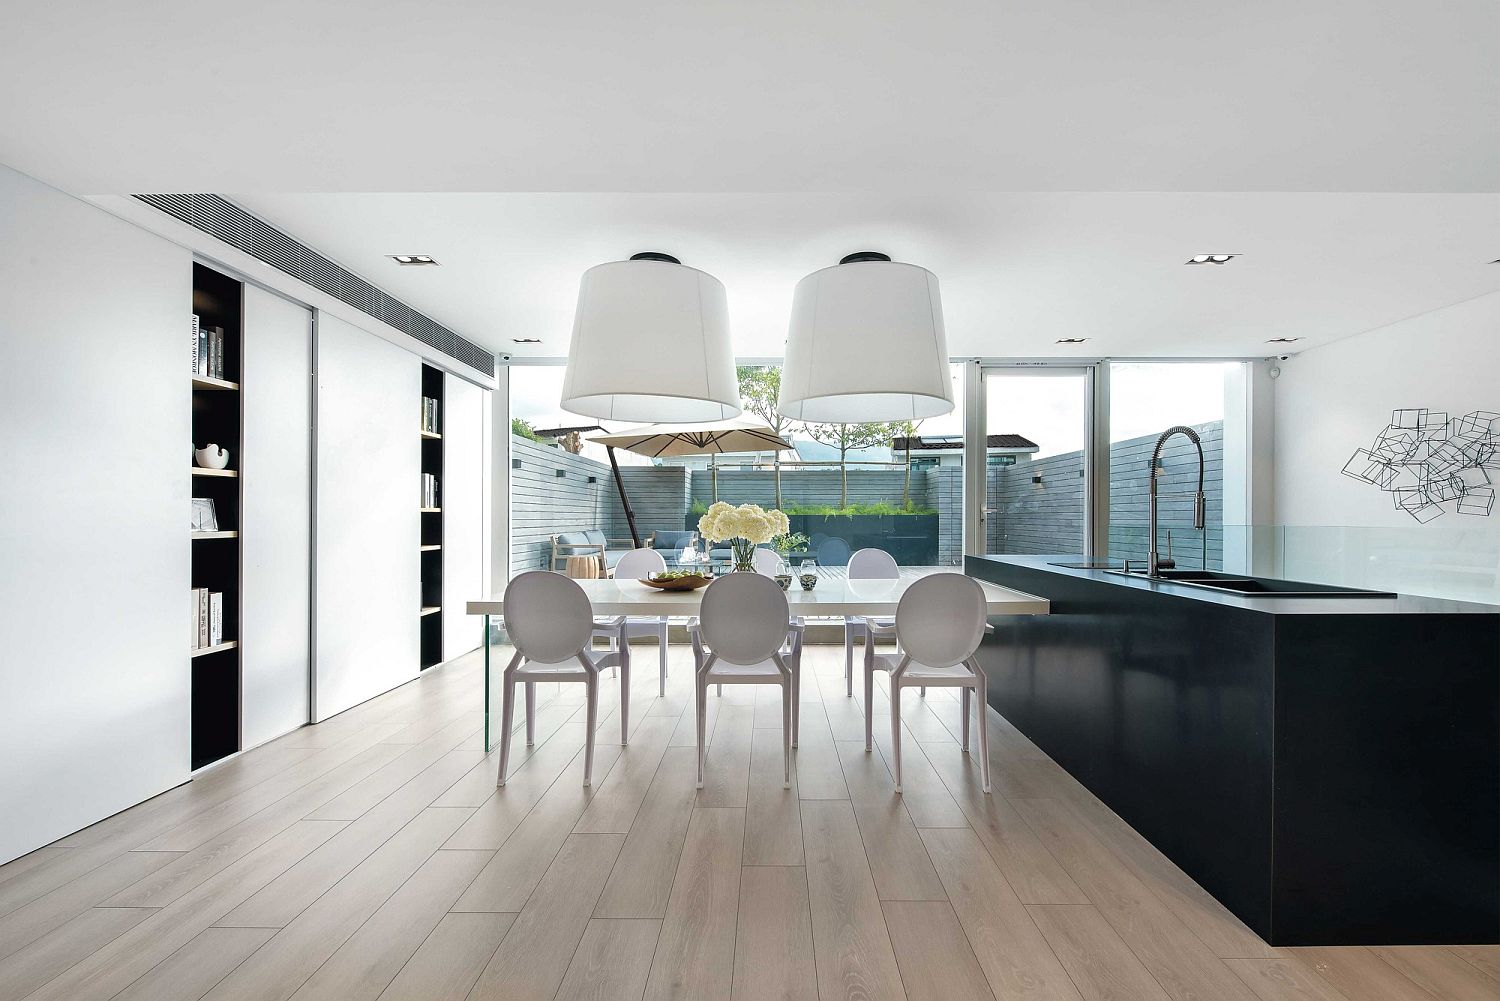 Kitchen and dining space of the contemporary home in Hong Kong